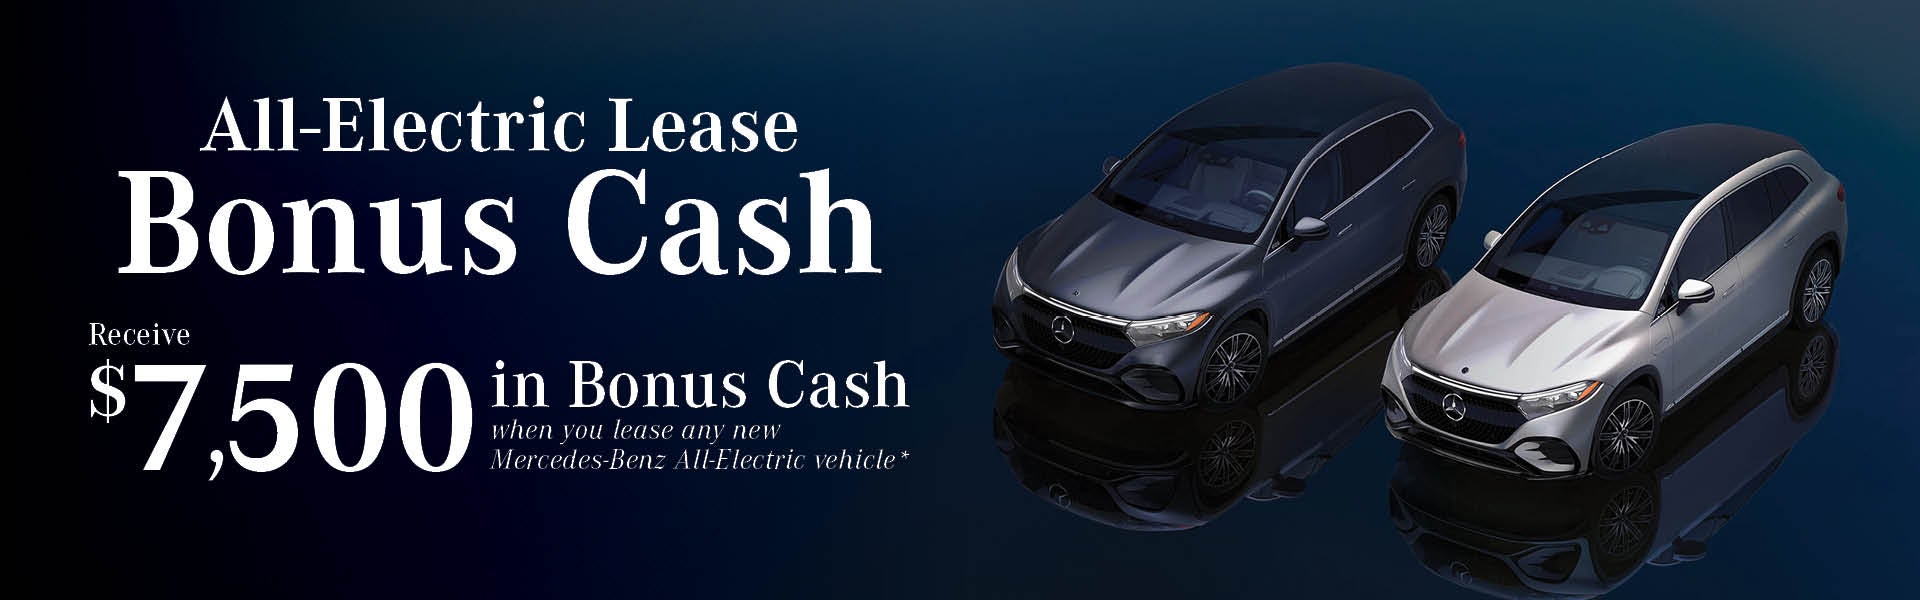 All-Electric Lease 